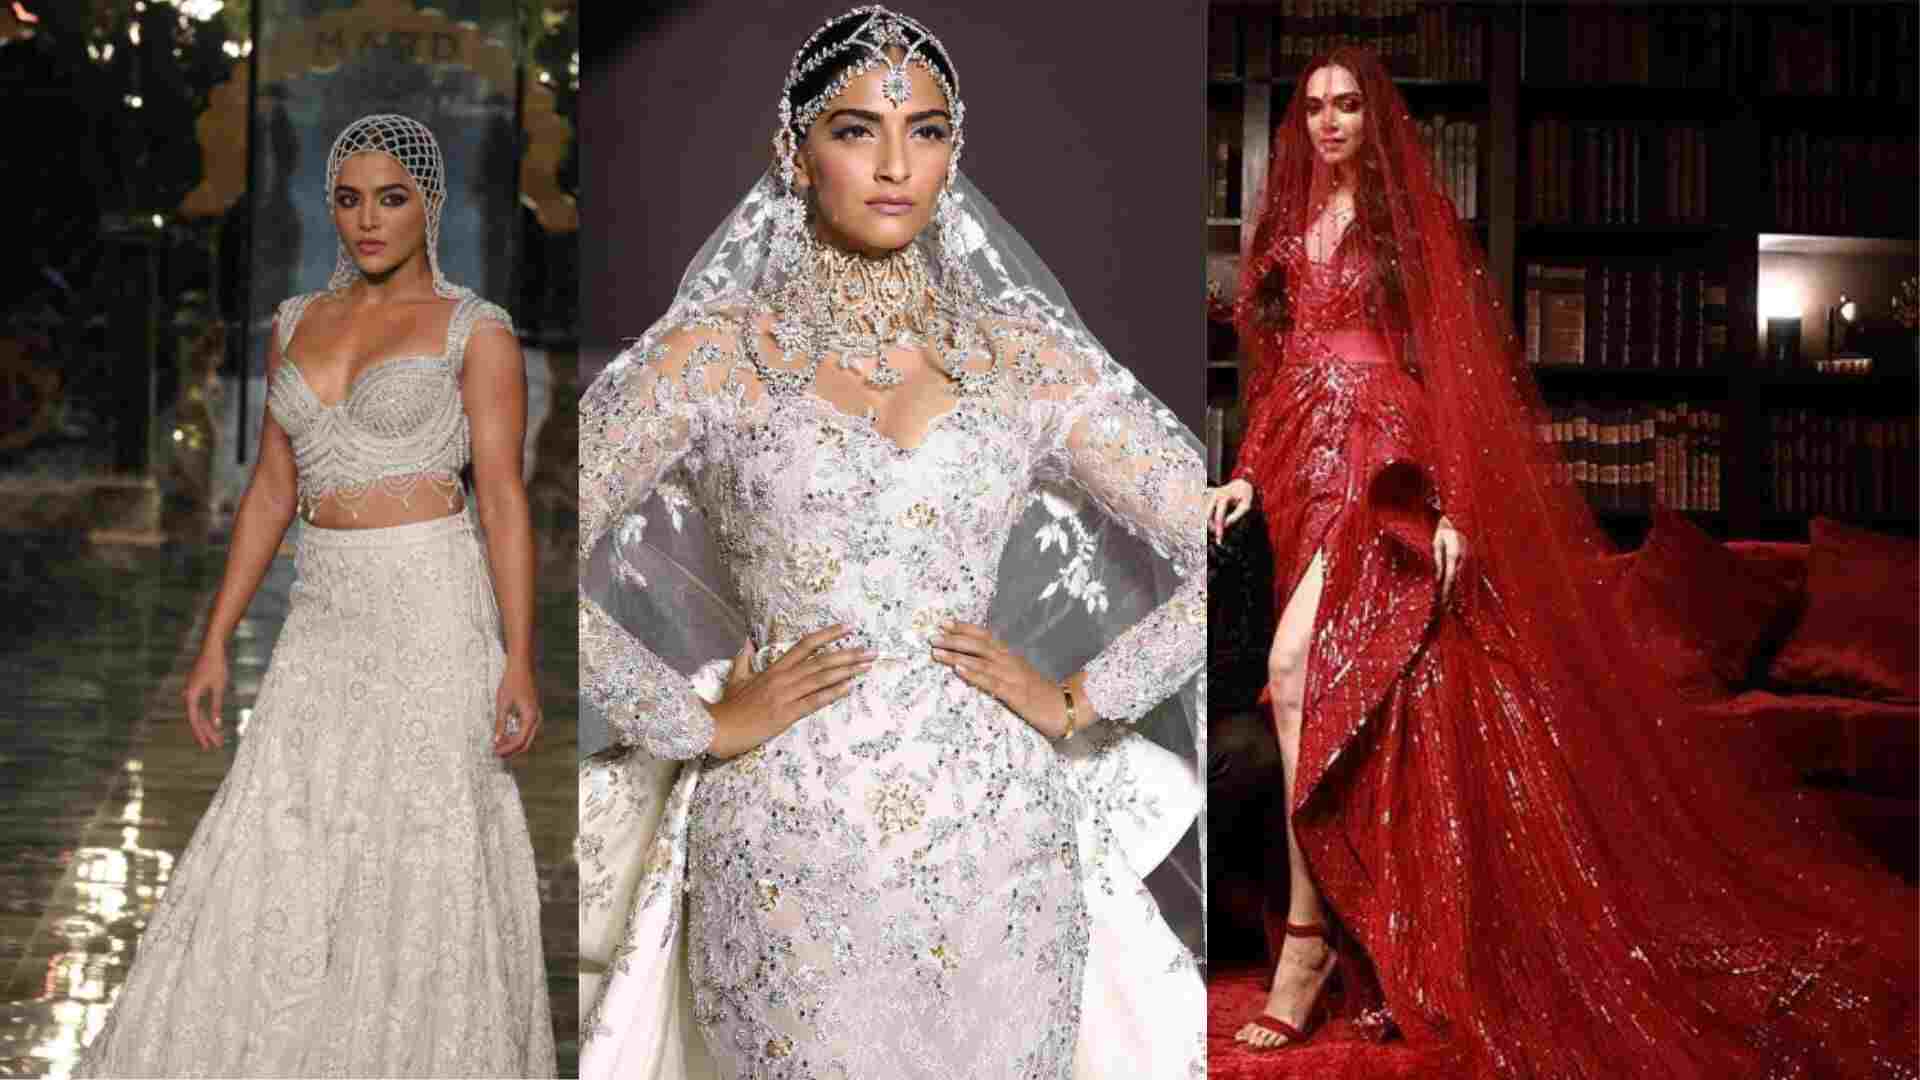 Wamiqa Gabbi’s Couture Week Veil A Hit? Relive The Best Celebrity Veil Moments